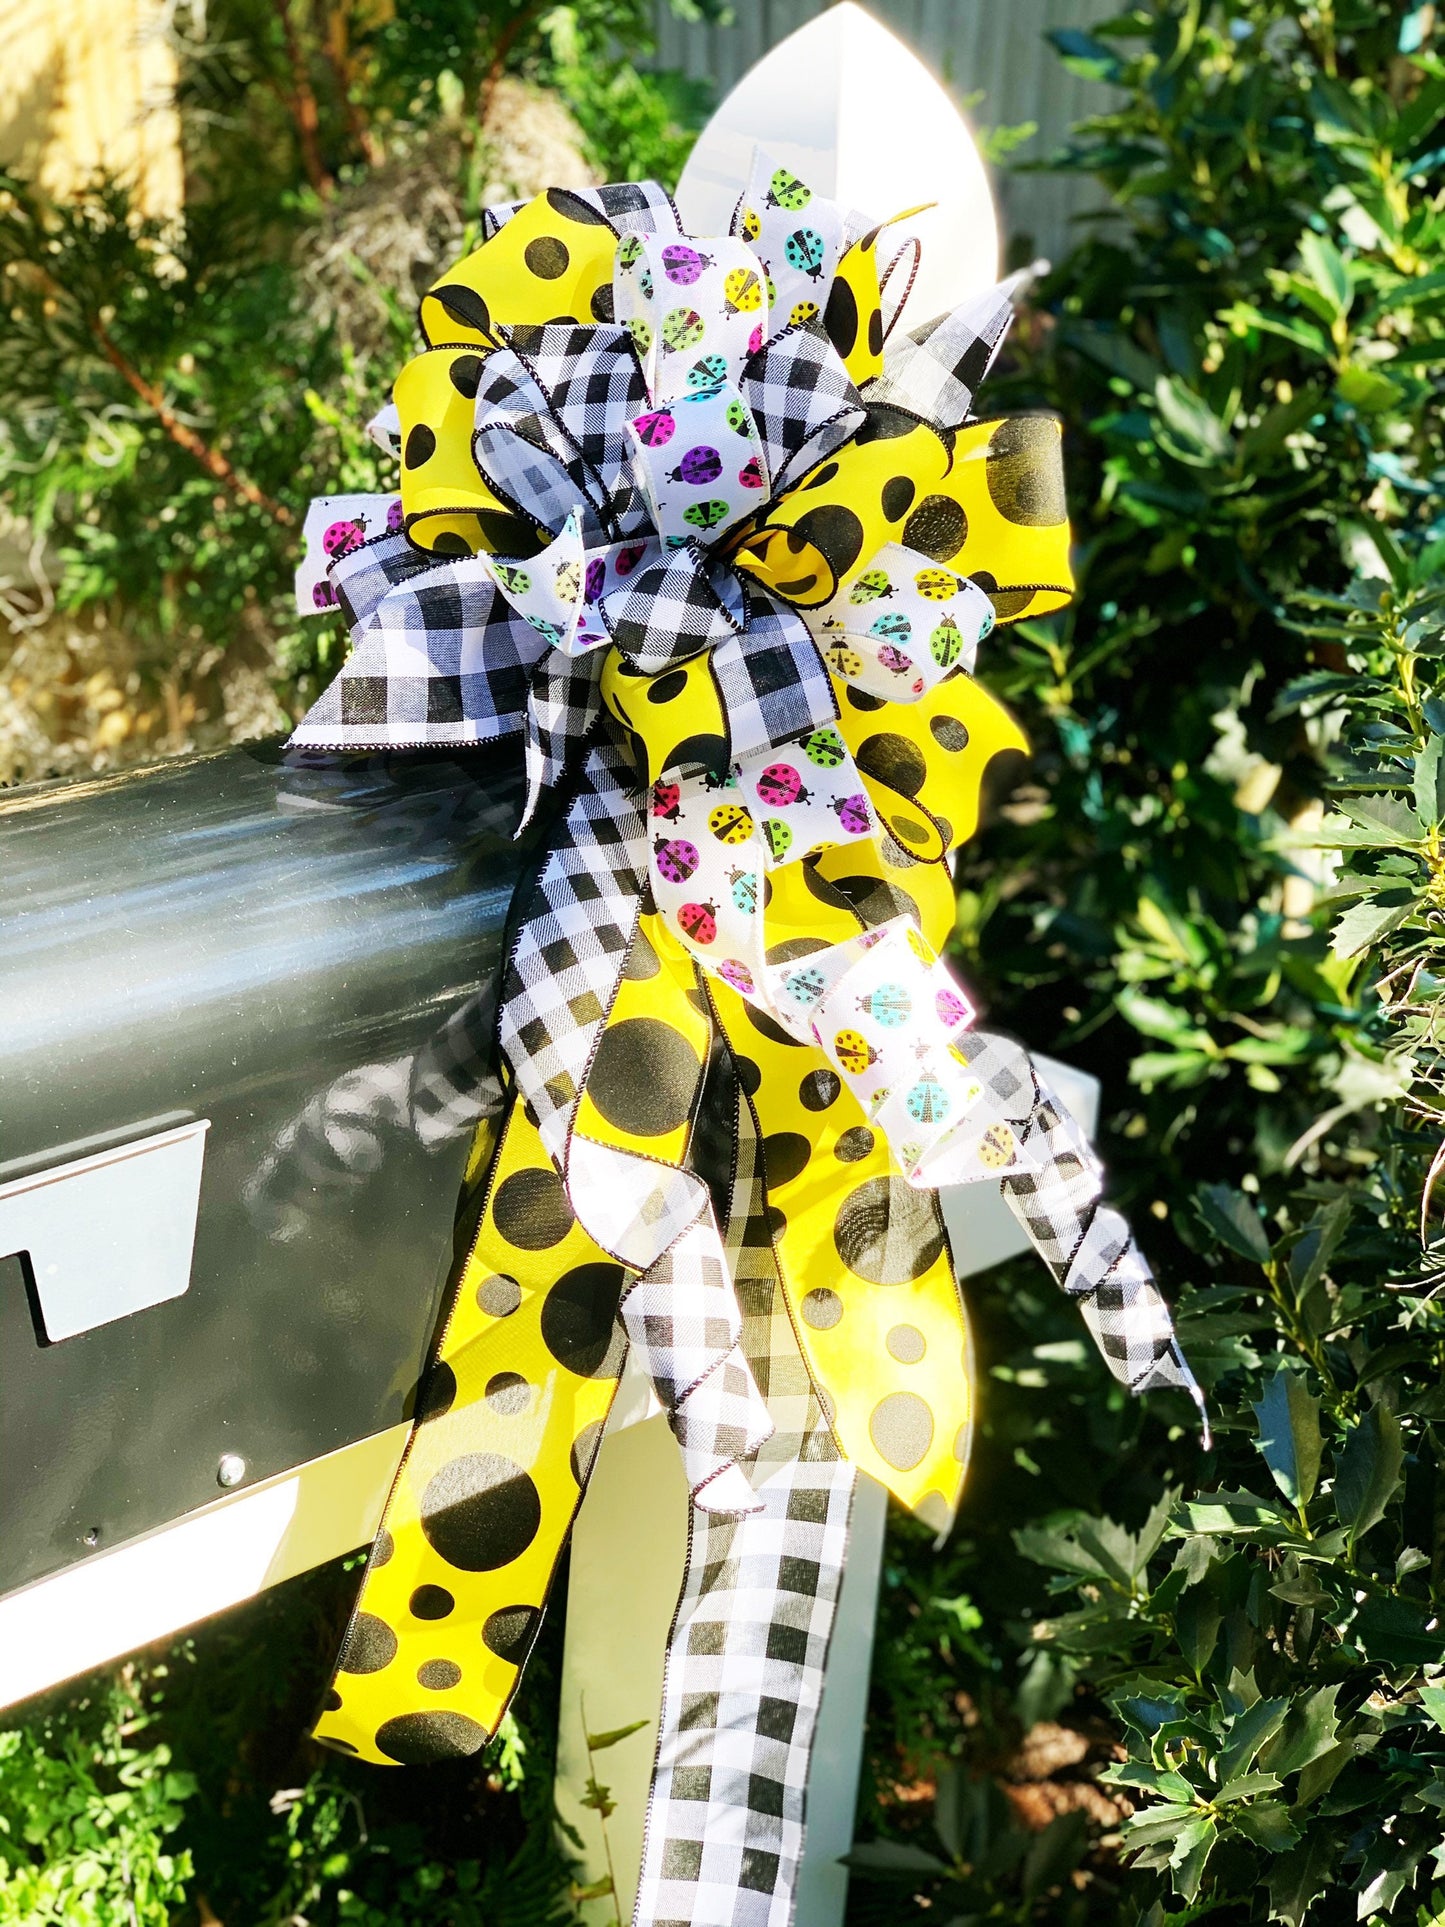 Everyday Collection - Lady Bug Bow,Lady Bugs,Lady Bugs Bow,Summer Bow,Wreath Bow,Mailbox Bow,Large Bow,Bow,Bows,Gift Bow,Gift Basket Bow